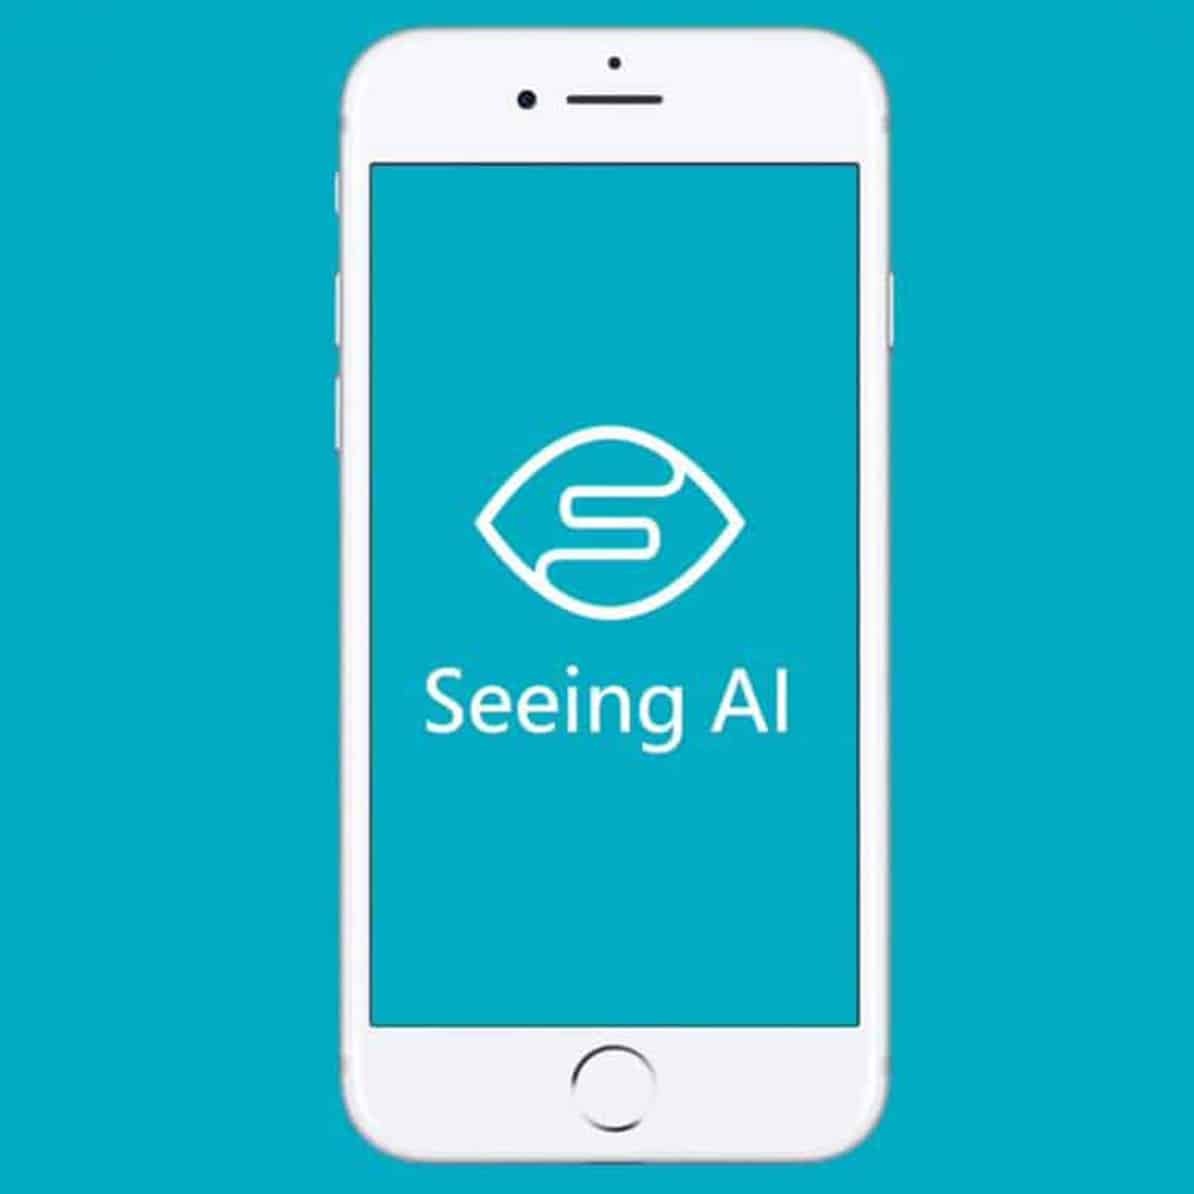 Application Seeing AI